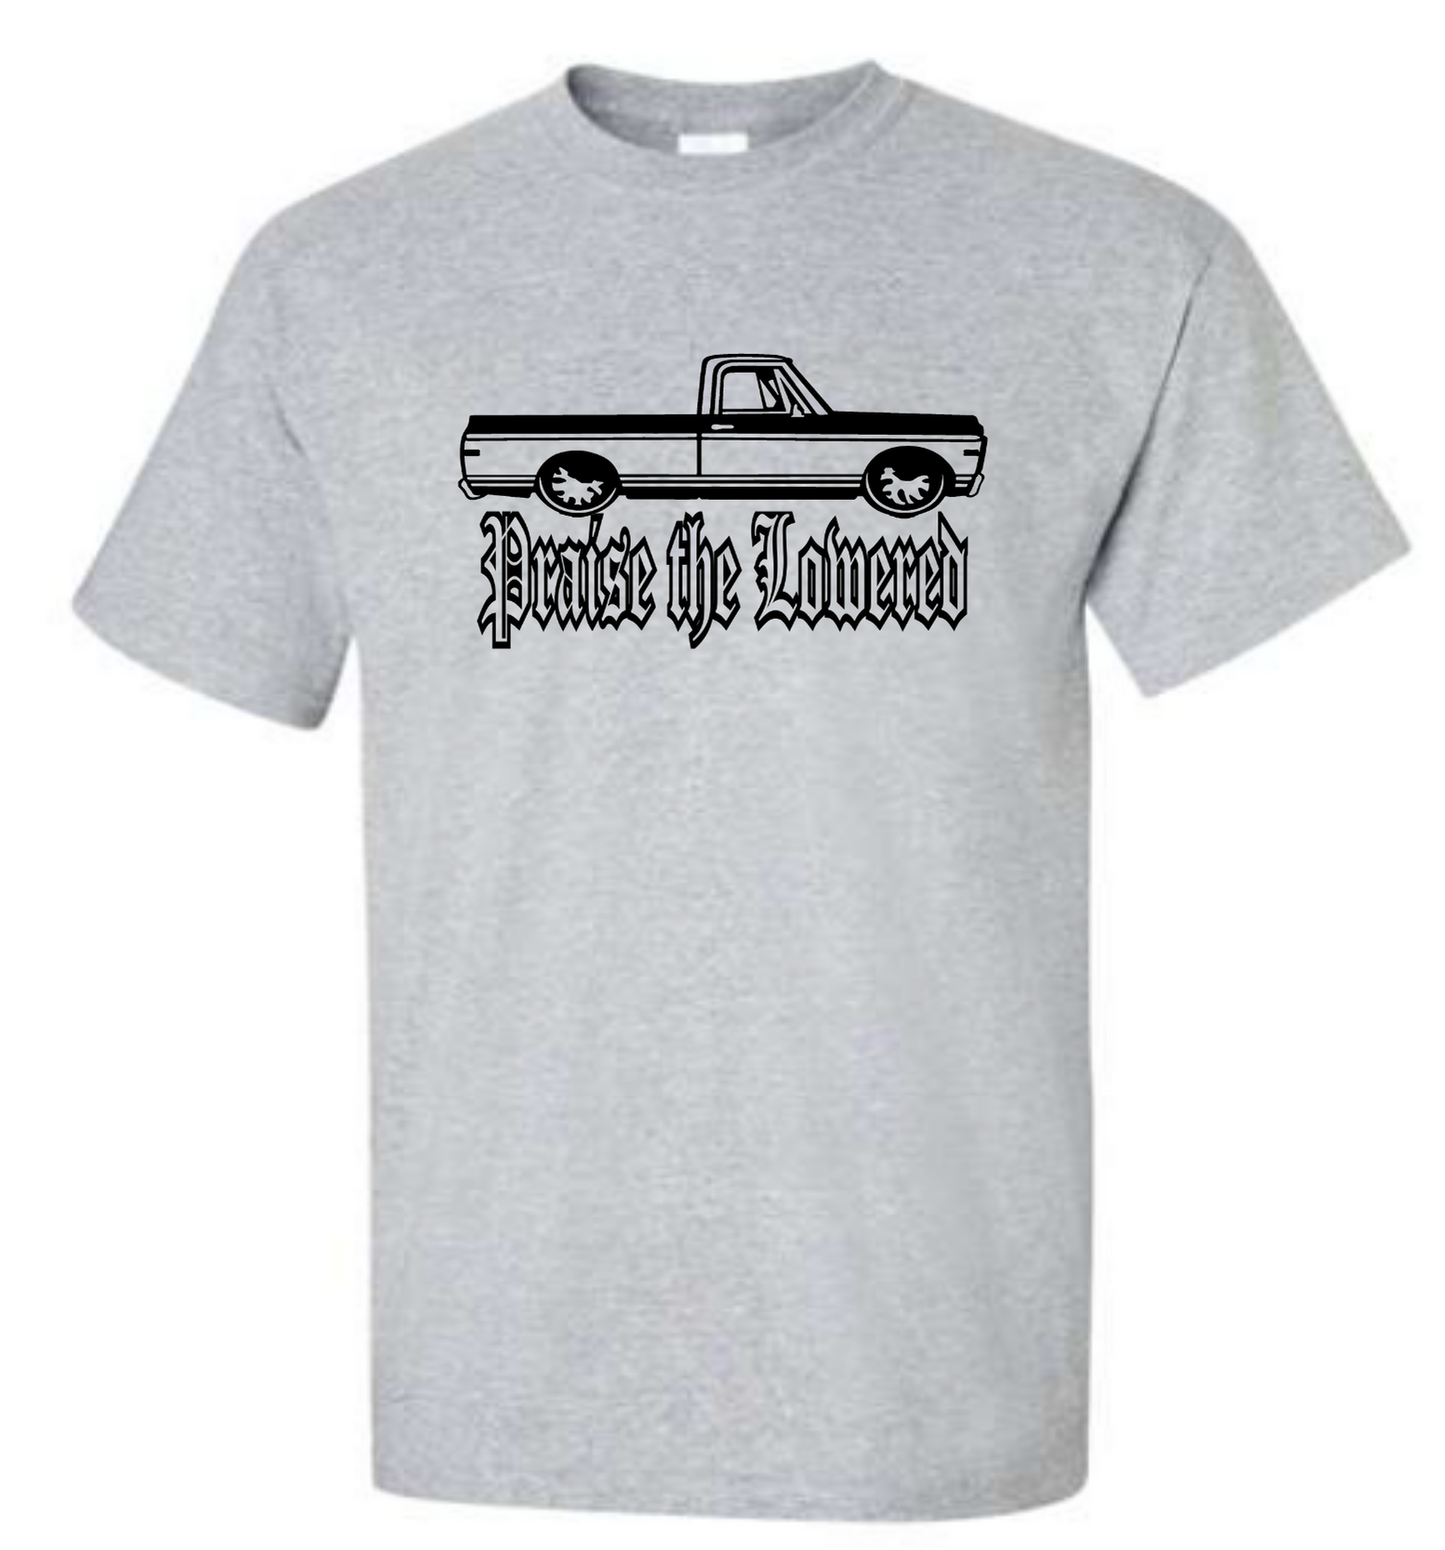 Praise the Lowered Chevy C10 - Graphic T-Shirt - Mister Snarky's